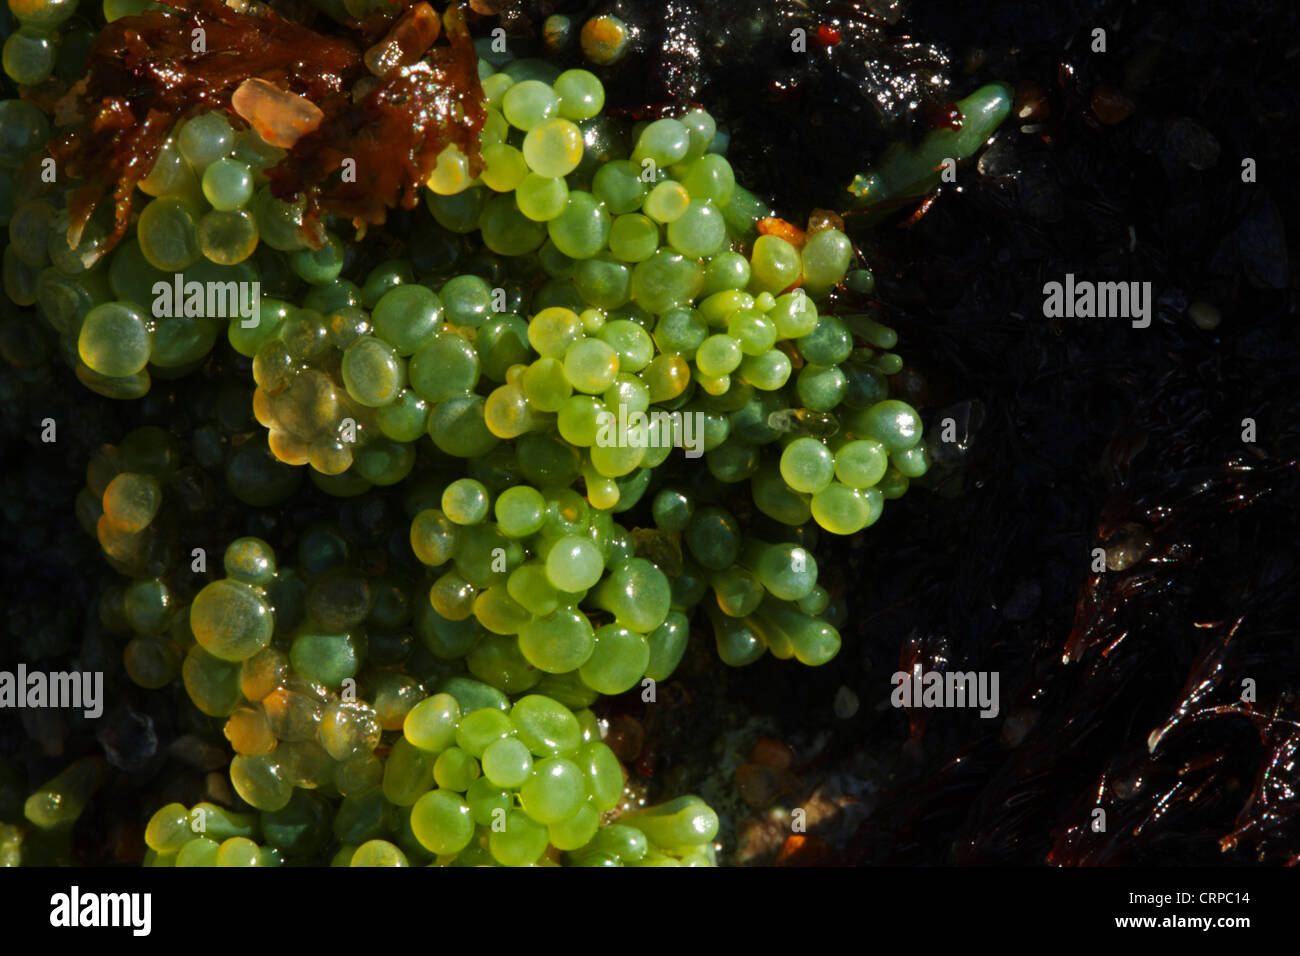 Berry caulerpa (Caulerpa peltata formely C. racemosa) in an intertidal (littoral) zone during spring low tide. Stock Photo